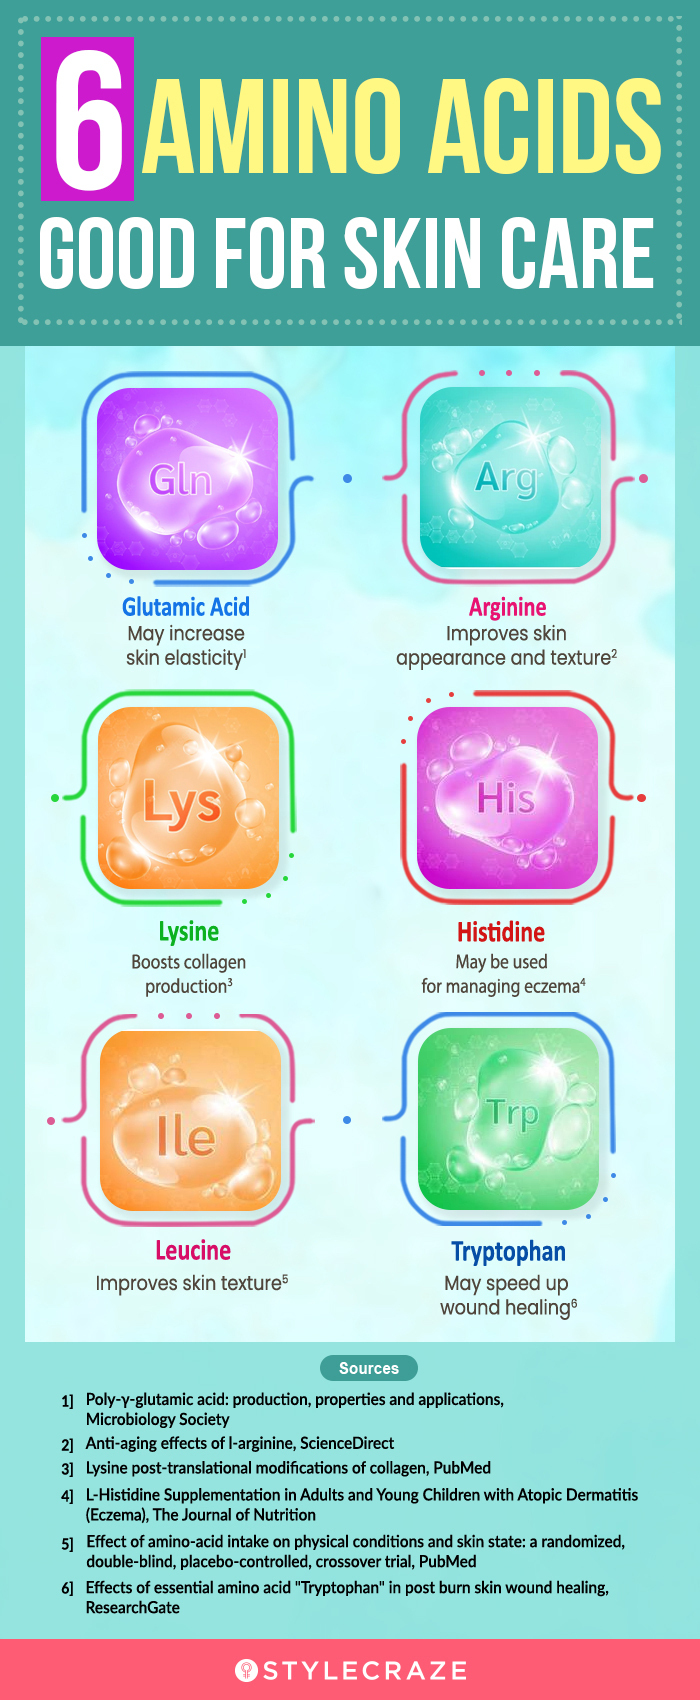 6 amino acids good for skin care (infographic)